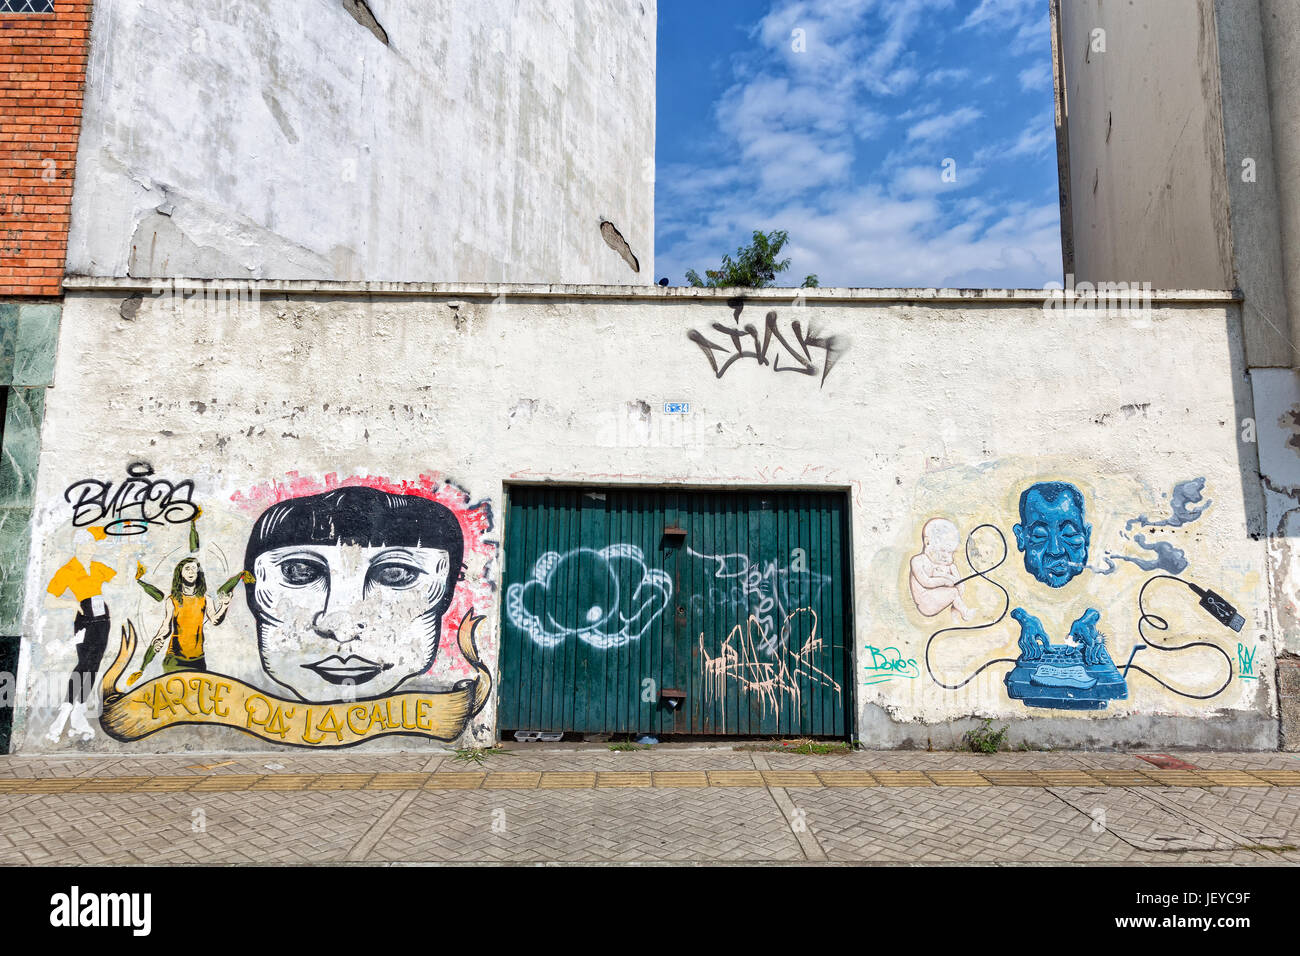 Street art in Cali, Colombia. Stock Photo